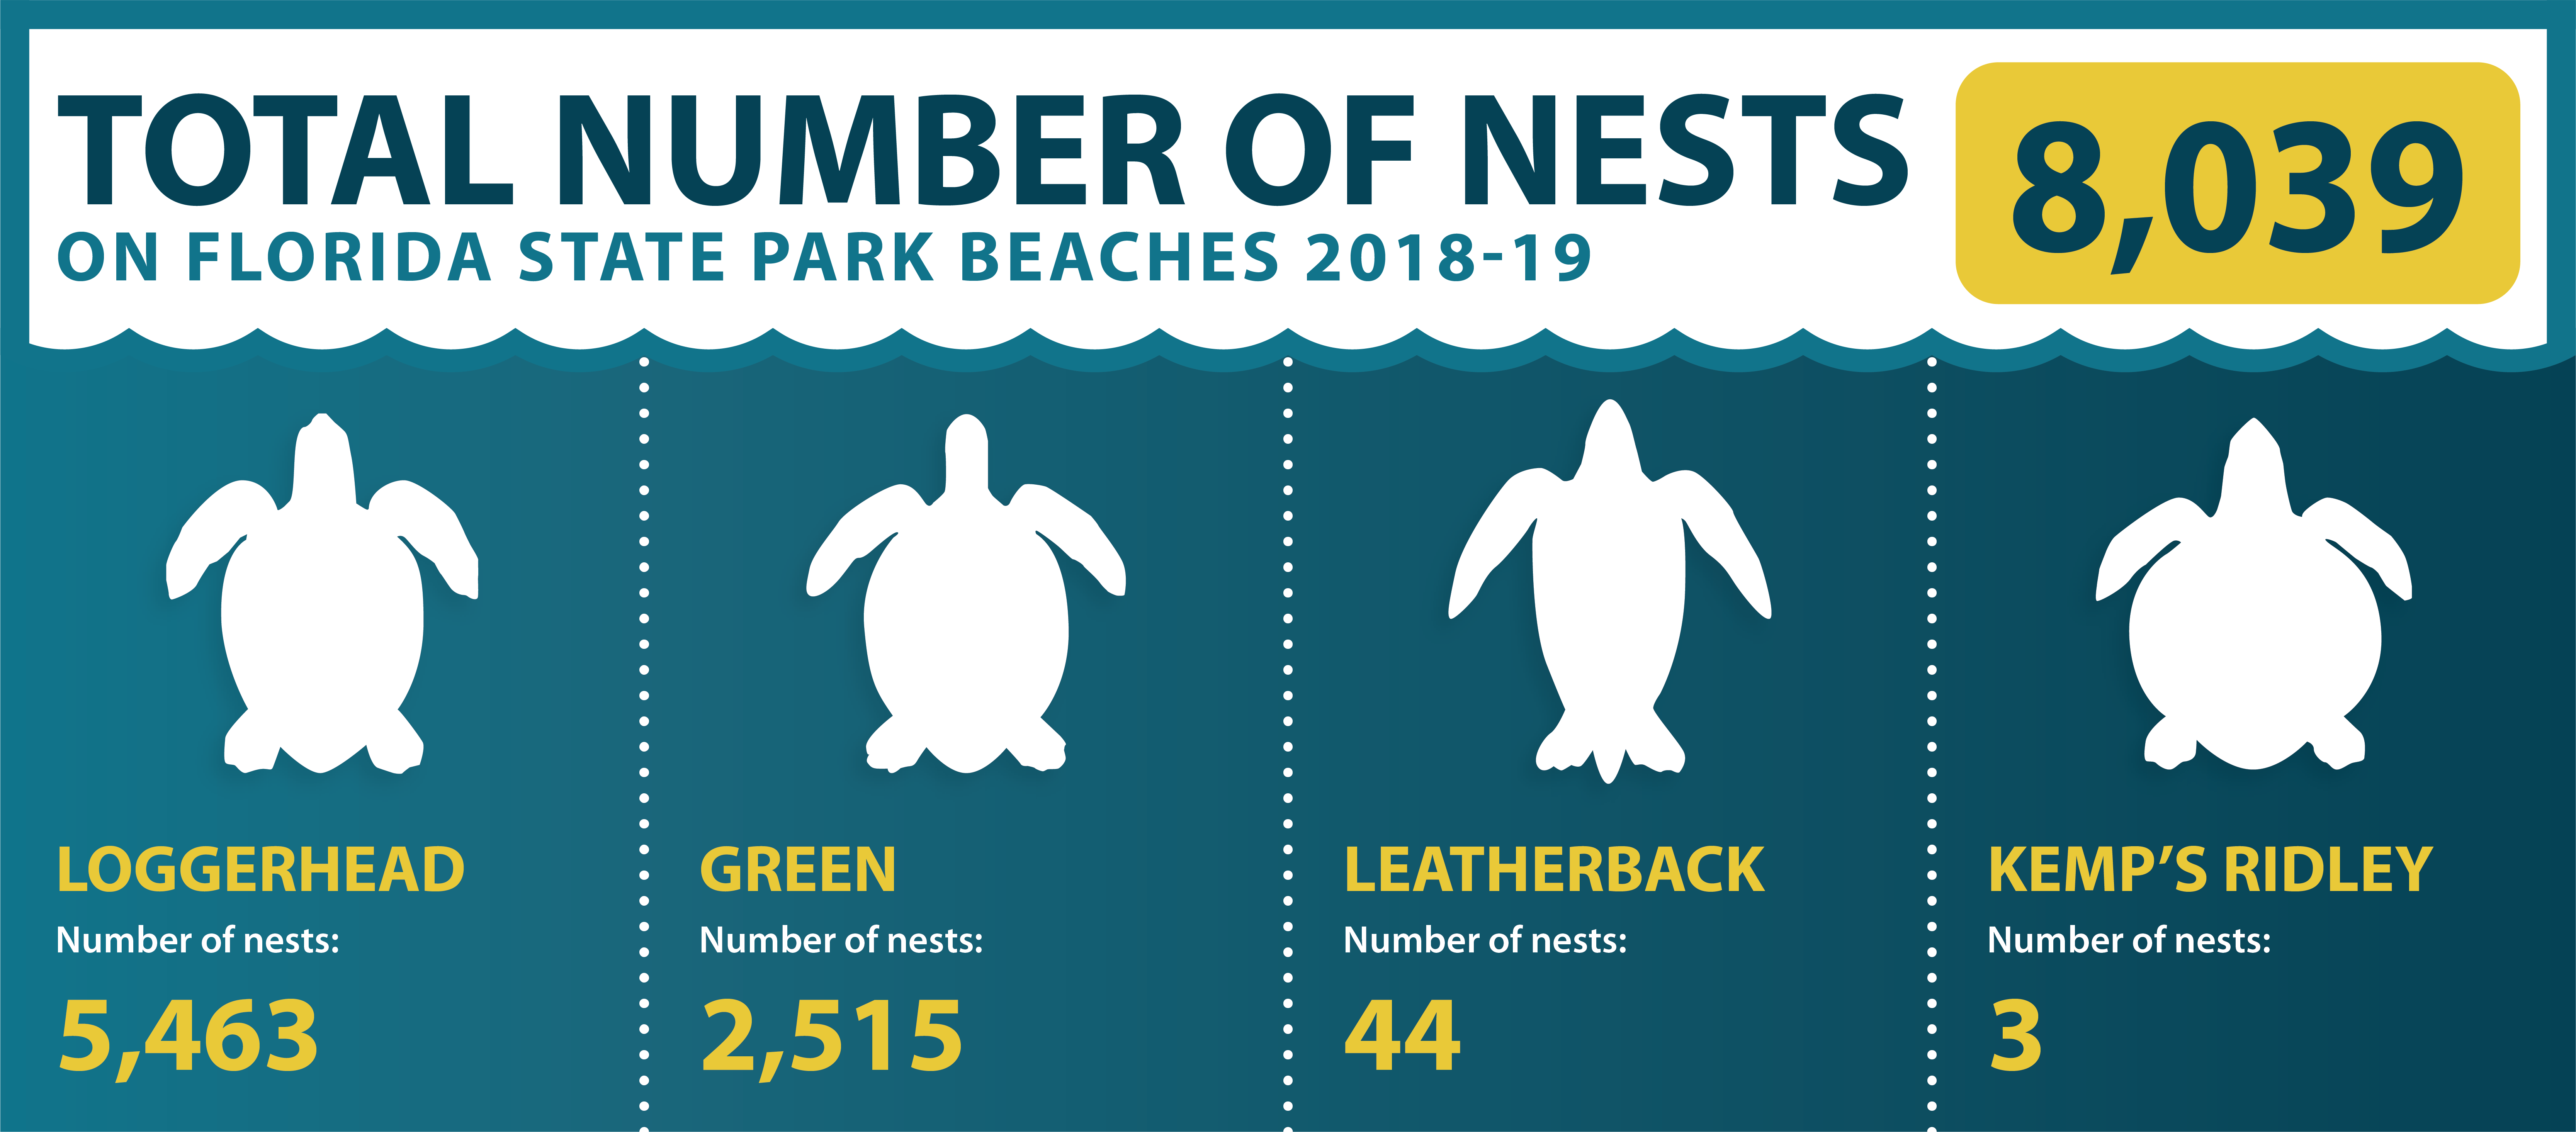 A graphic showing the number of turtle nests on state park beaches 2018-19. 5463 loggerhead, 2515 green, 44 leatherback, 3 kemp's ridley. 